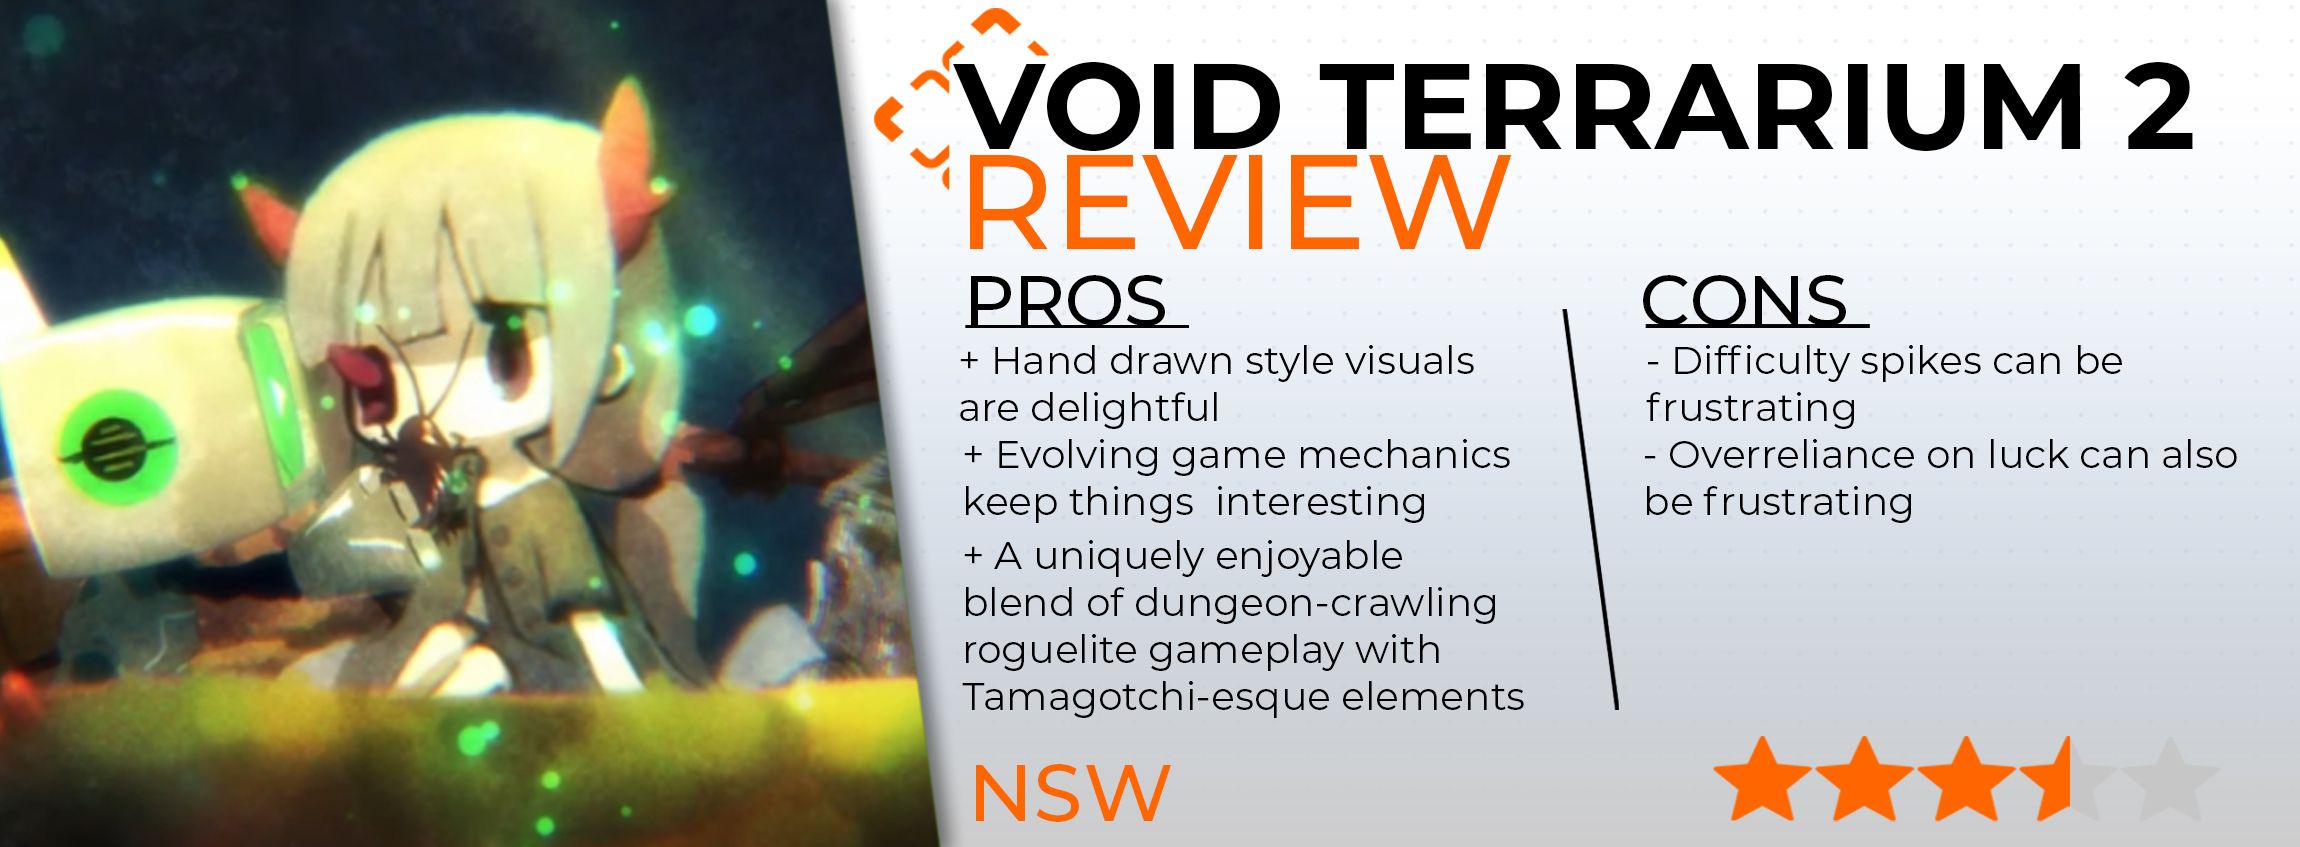 A Void Terrarium 2 review card that scores the game 3.5 out of 5 stars.